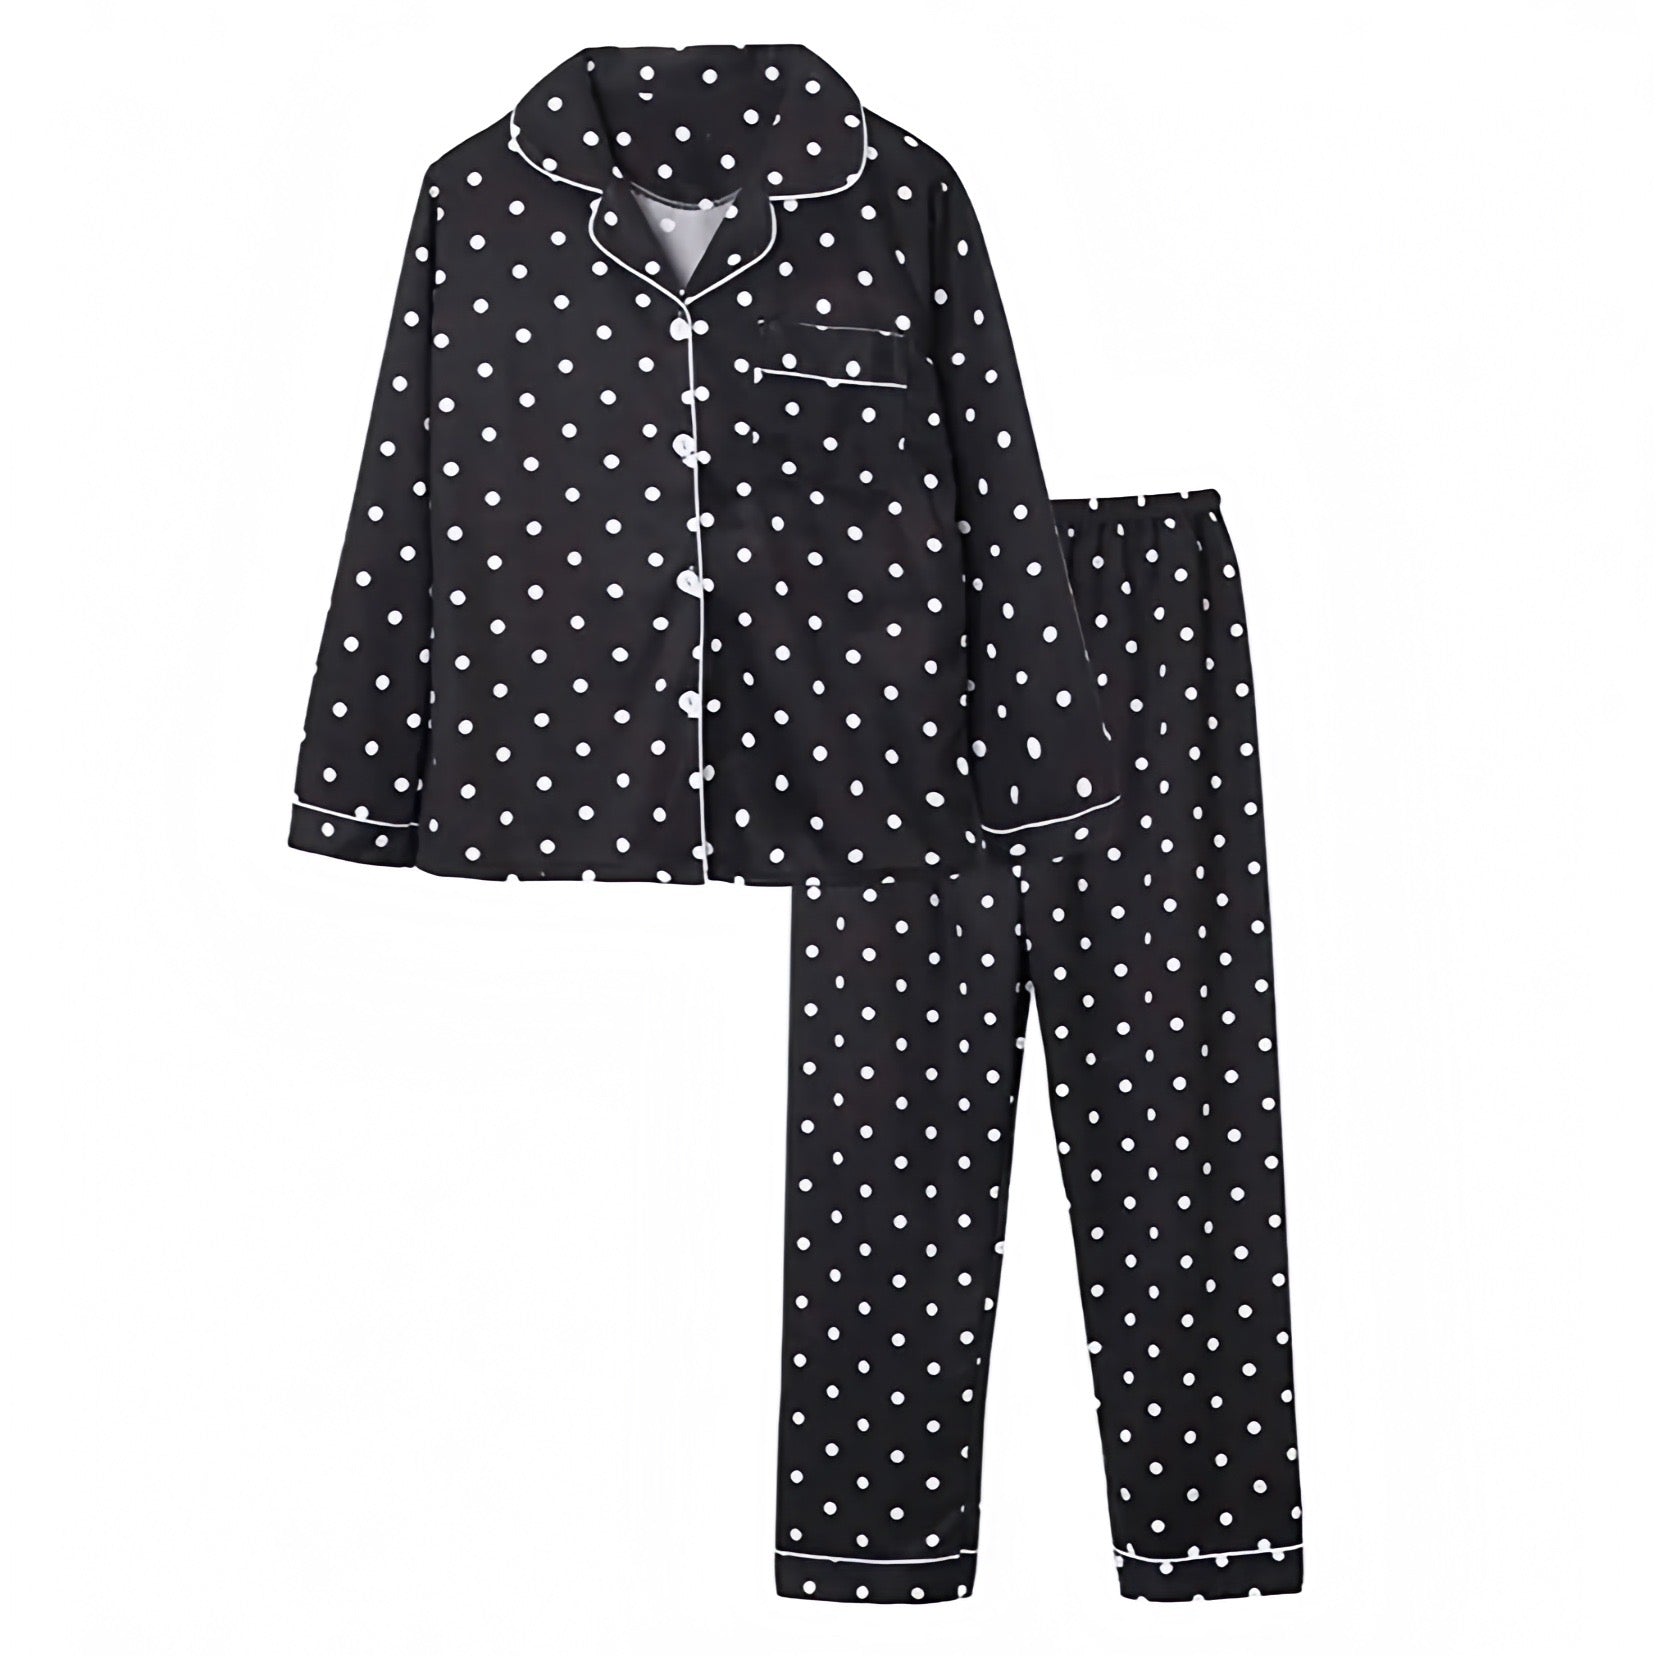 black-and-white-polka-dot-patterned-cotton-linen-v-neck-button-down-long-sleeve-shirt-top-mid-low-rise-pants-bottoms-pajama-two-piece-set-pjs-cozy-comfy-lounge-wear-women-ladies-chic-trendy-spring-2024-summer-preppy-style-casual-feminine-european-classy-elegant-eber-jey-roller-rabbit-dupe